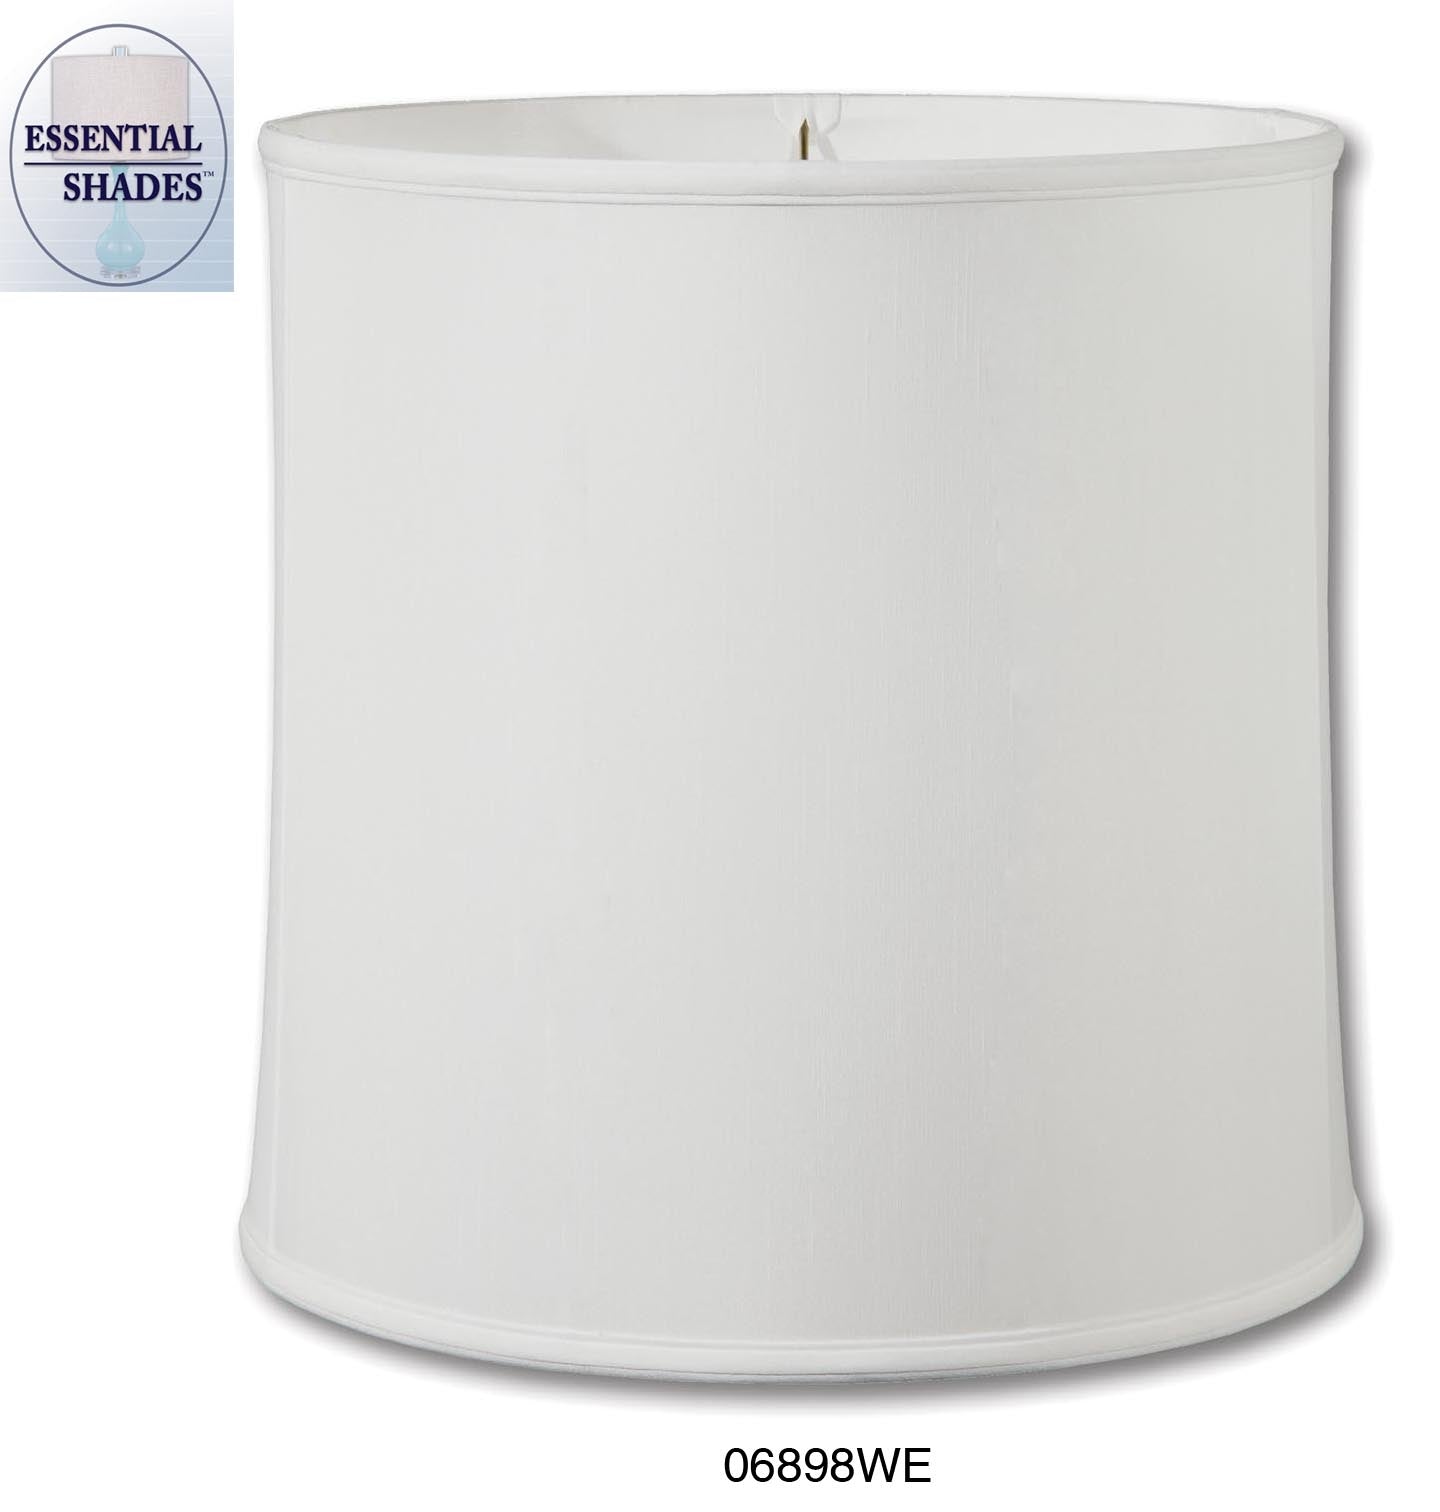 Essential Shades Brand Off White Color Deep Drum No-Hug, Value Lamp Shades